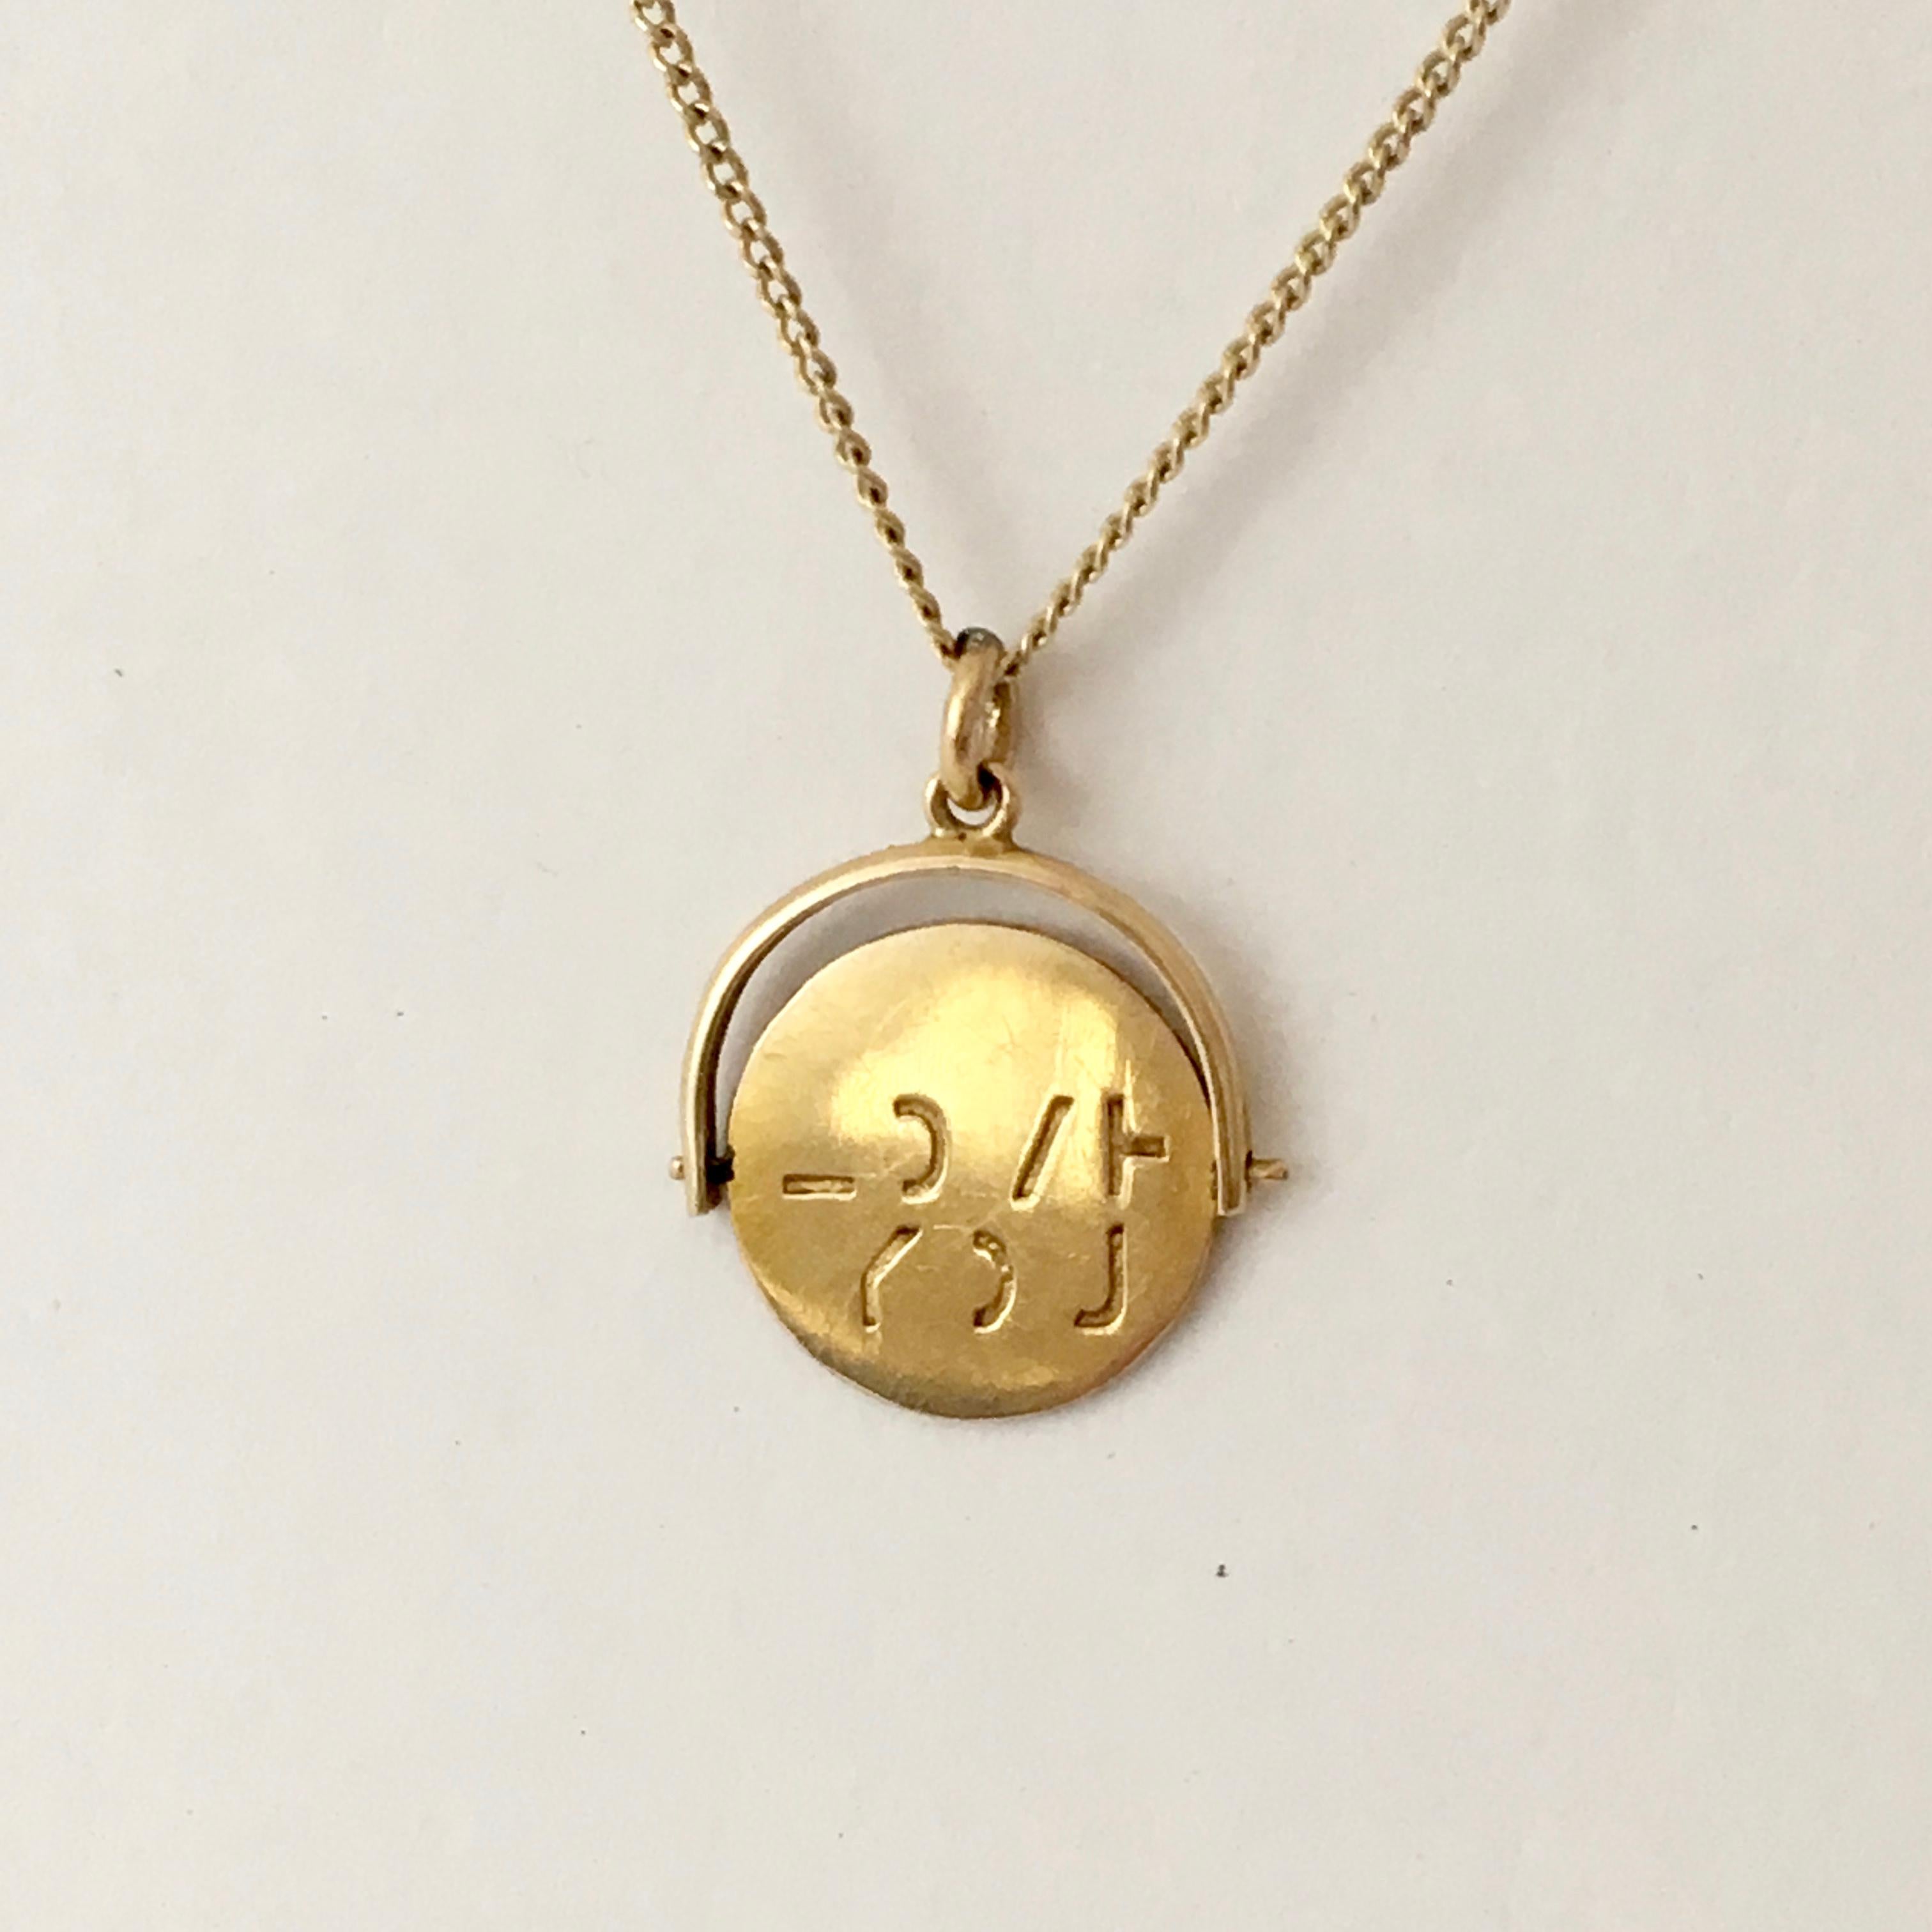 This lovely 9ct gold spinner charm is stylishly sentimental - as you spin the coin, 'I Love You' is revealed. Understated with a quirky appeal, it would make a gorgeous addition to any charm collection and a thoughtful gift for a loved one. 

Charm